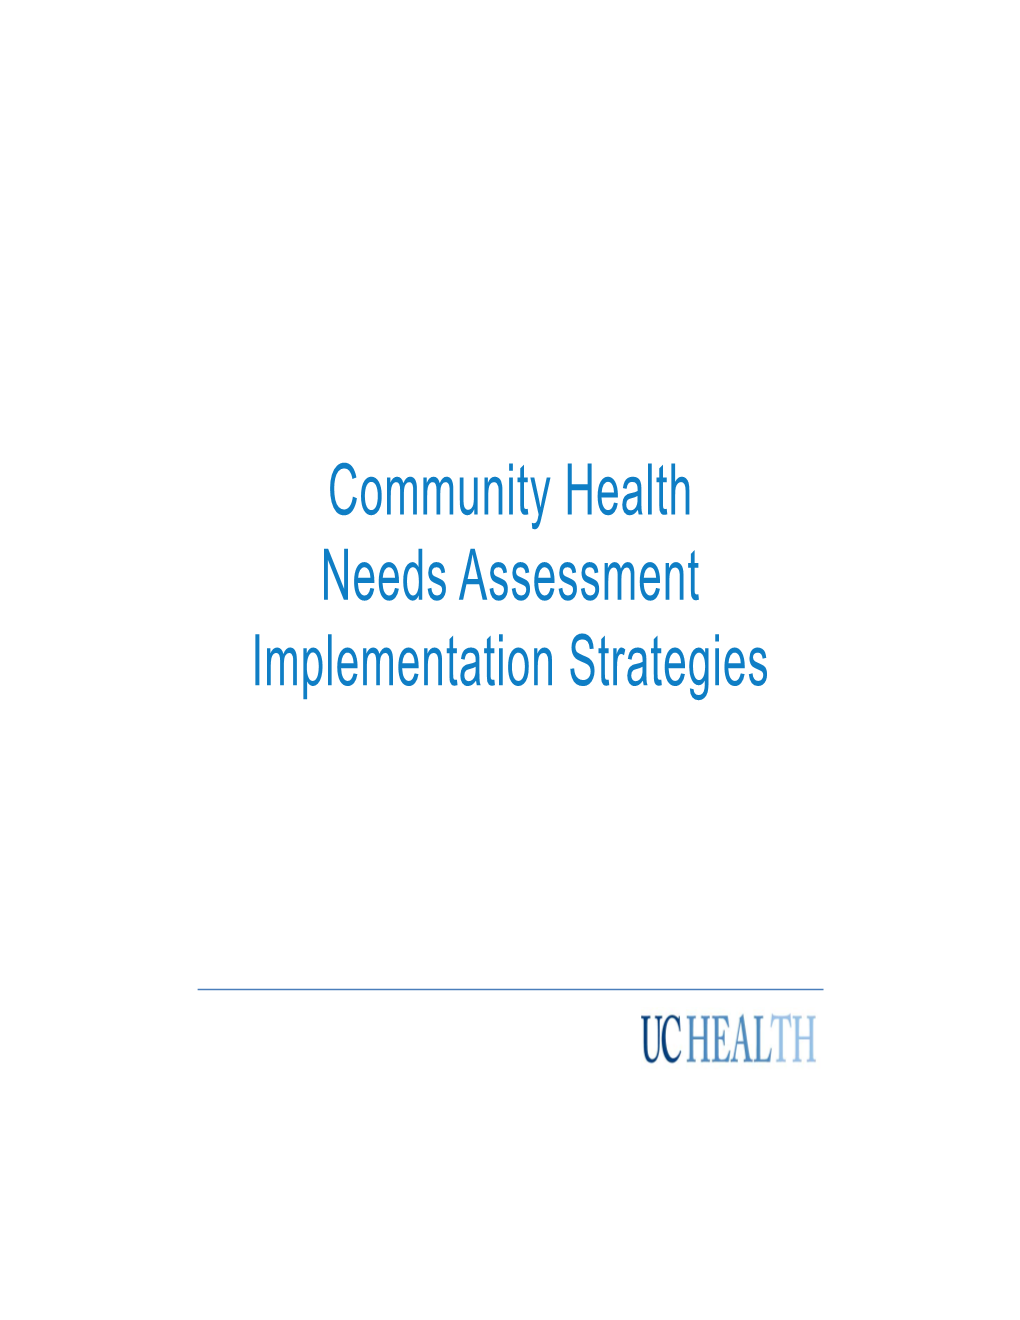 Community Health Needs Assessment Implementation Strategies Overview